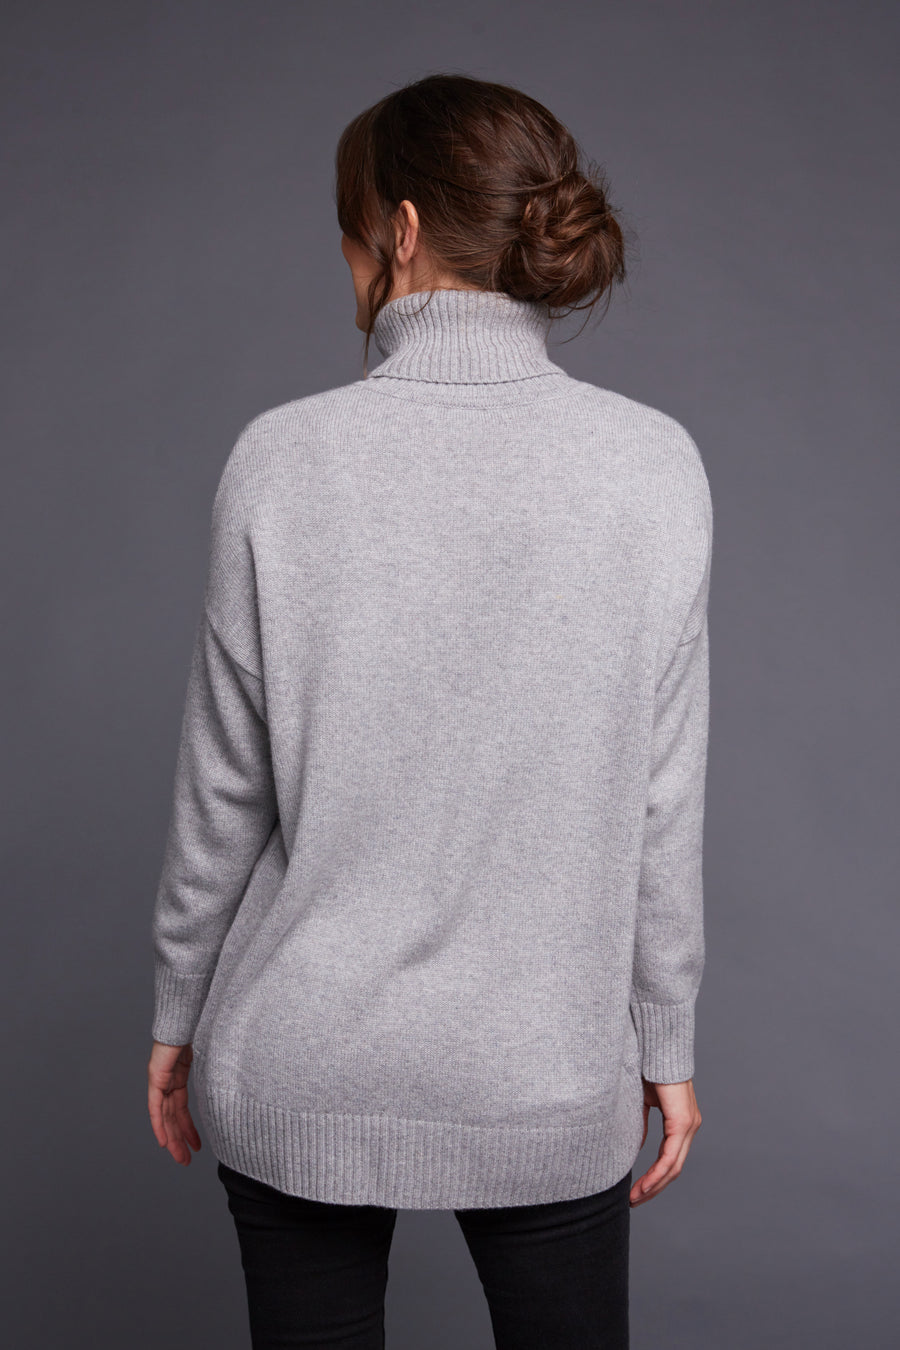 pine cashmere women's turtleneck sweater with long sleeve and relaxed trendy fit  in grey color made with high quality 100% pure organic cashmere